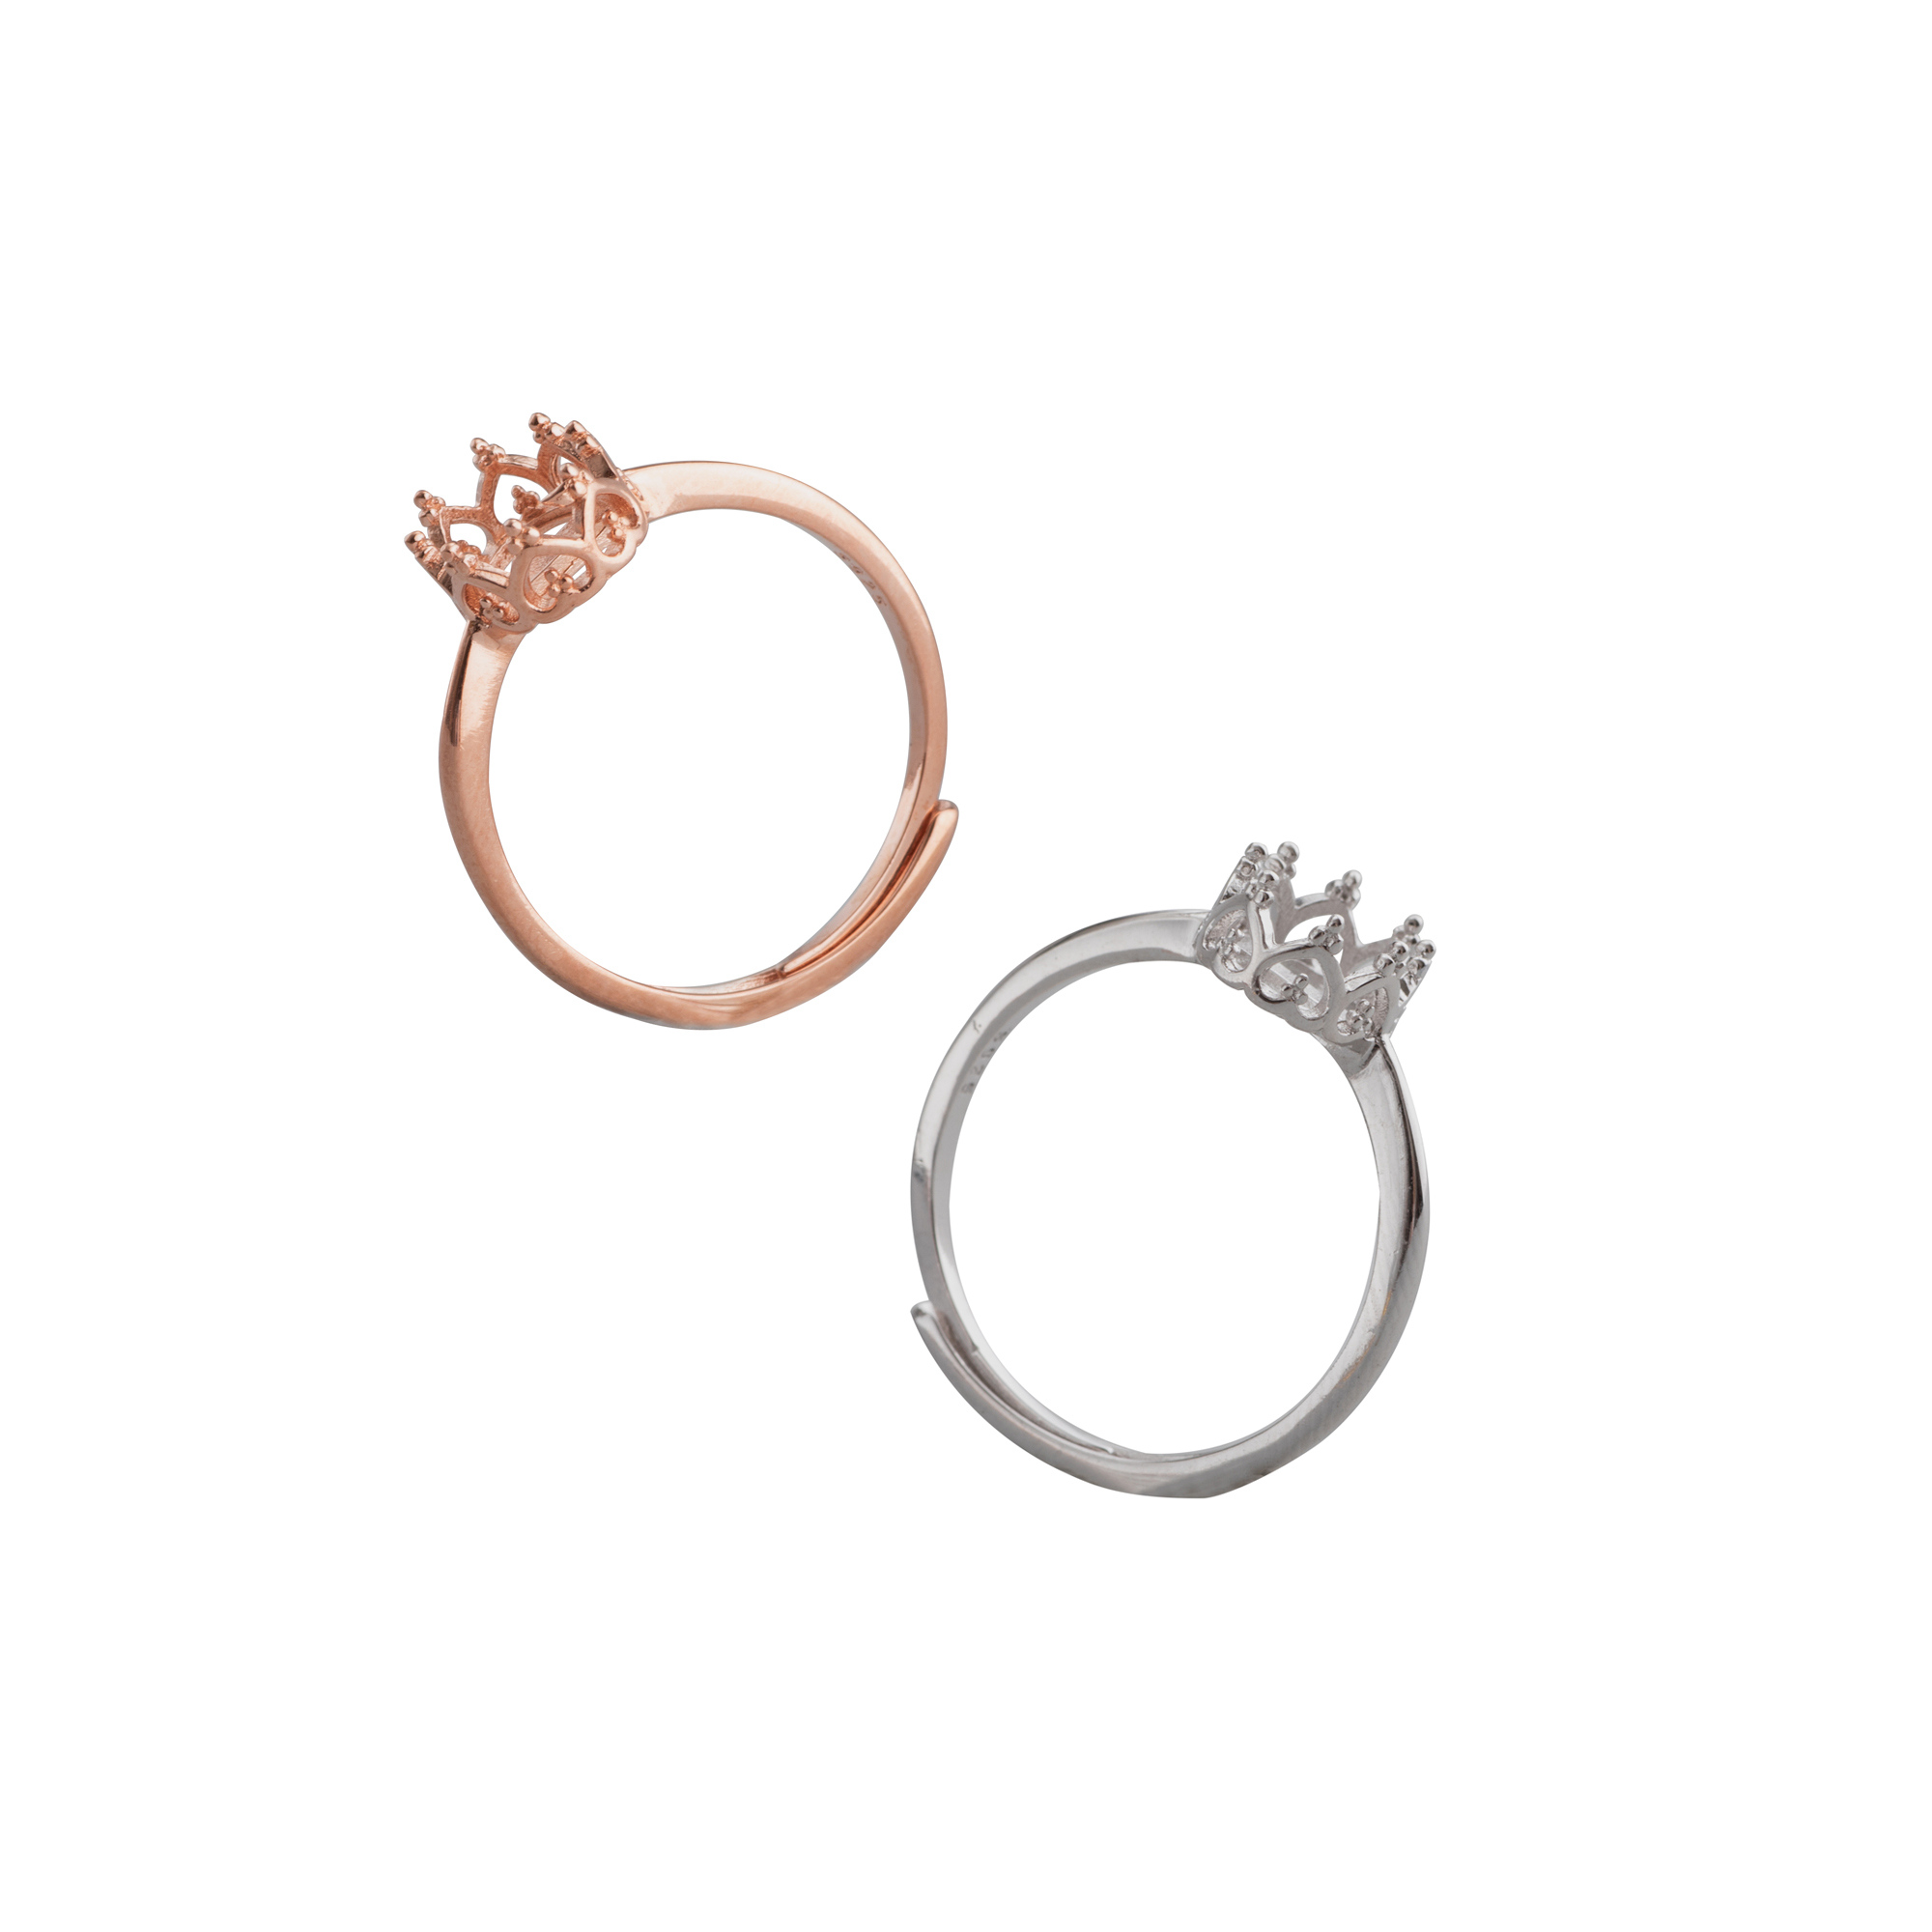 1Pcs 6X8MM Oval Silver Rose Gold Gemstone Cz Stone Crown Prong Bezel Solid 925 Sterling Silver Adjustable Ring Settings 1224019 - Click Image to Close